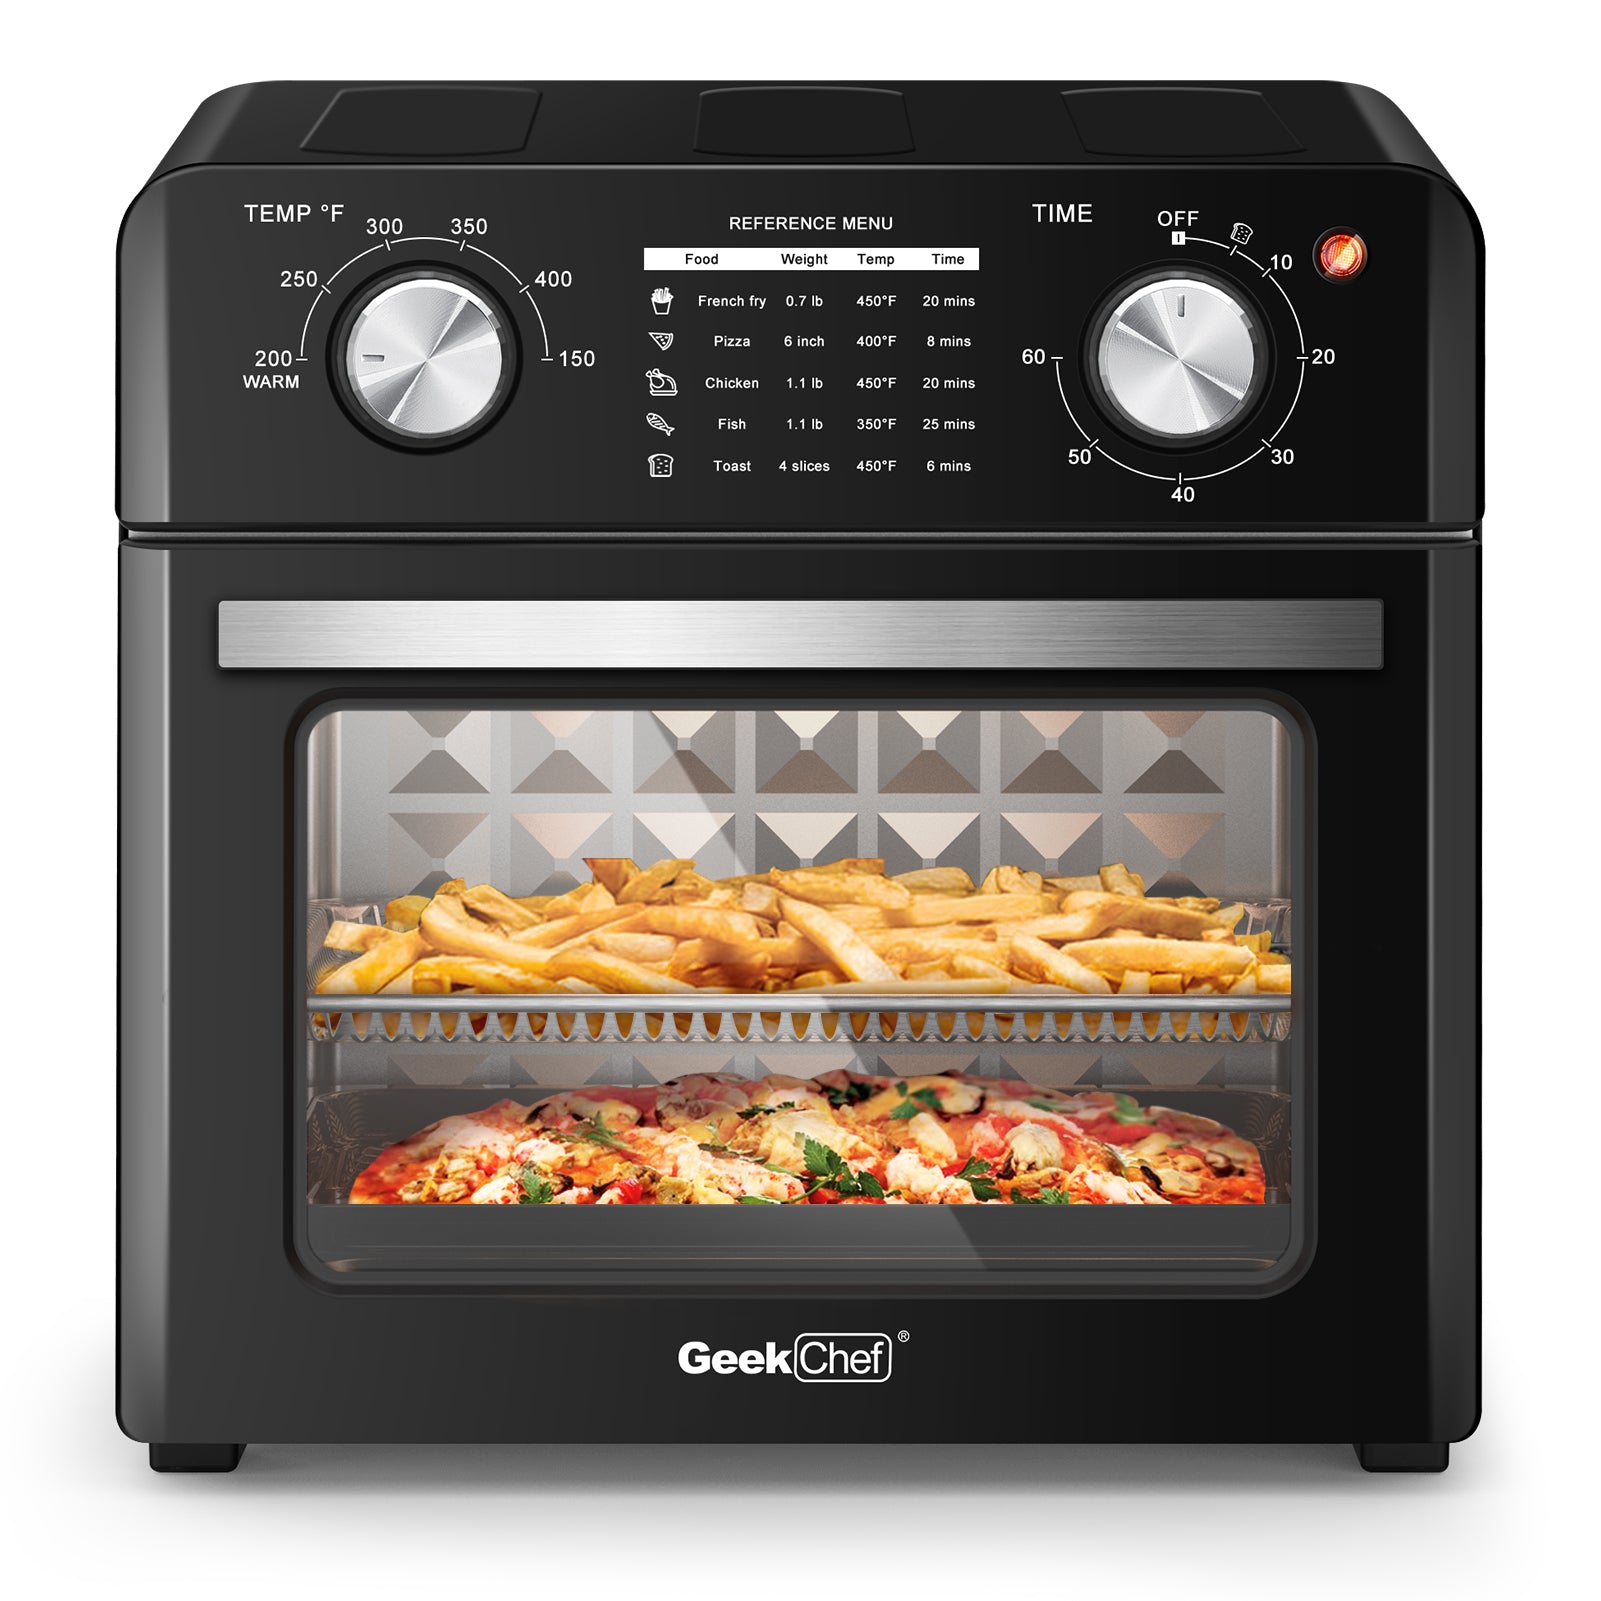 Geek Chef Air Fryer 10QT, Countertop Toaster Oven, 4 Slice Toaster Air Fryer Oven Warm